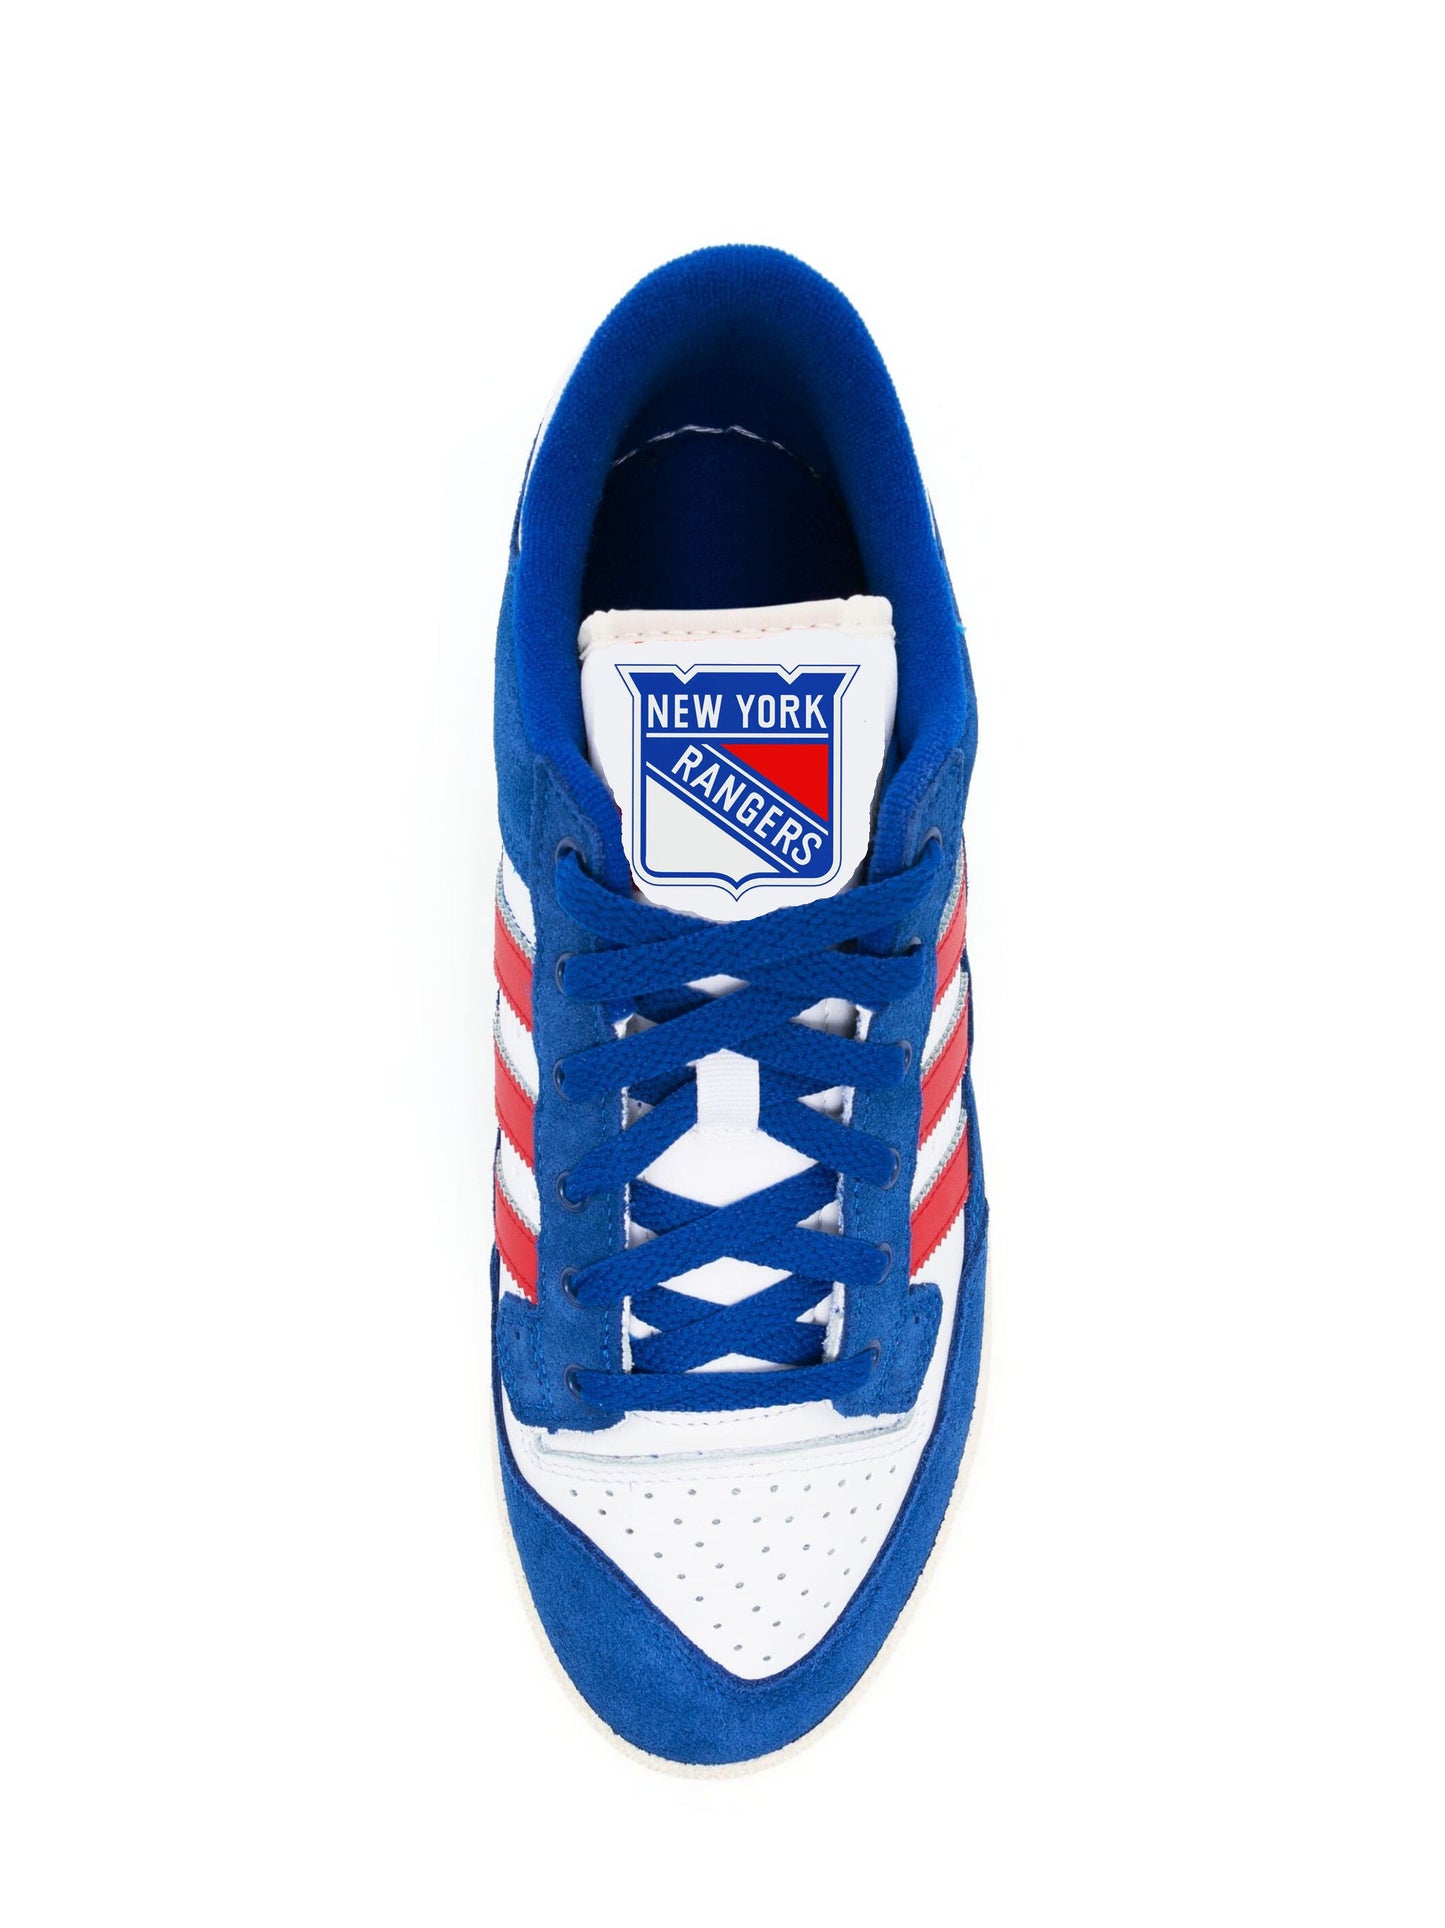 Limited edition Blue / White / Red New York Rangers Adidas centennial low trainers / sneakers